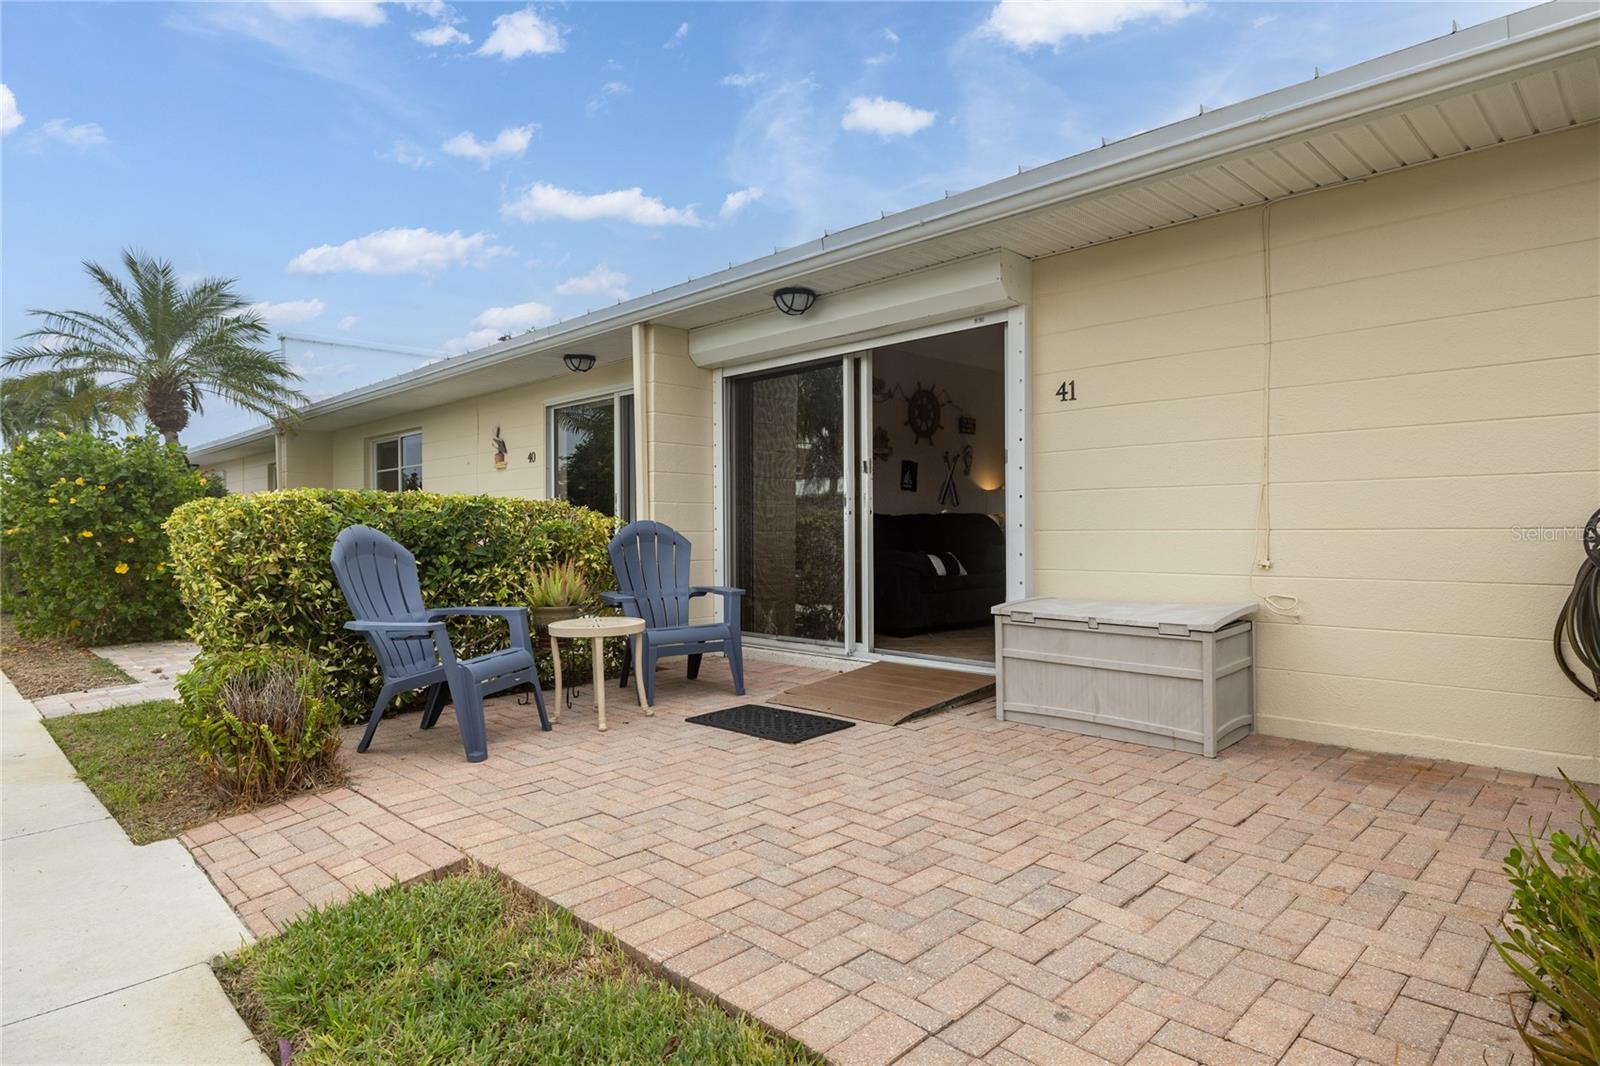 Homes for sale in Sarasota | View 5830 Midnight Pass Road, 41 | 1 Bed, 1 Bath